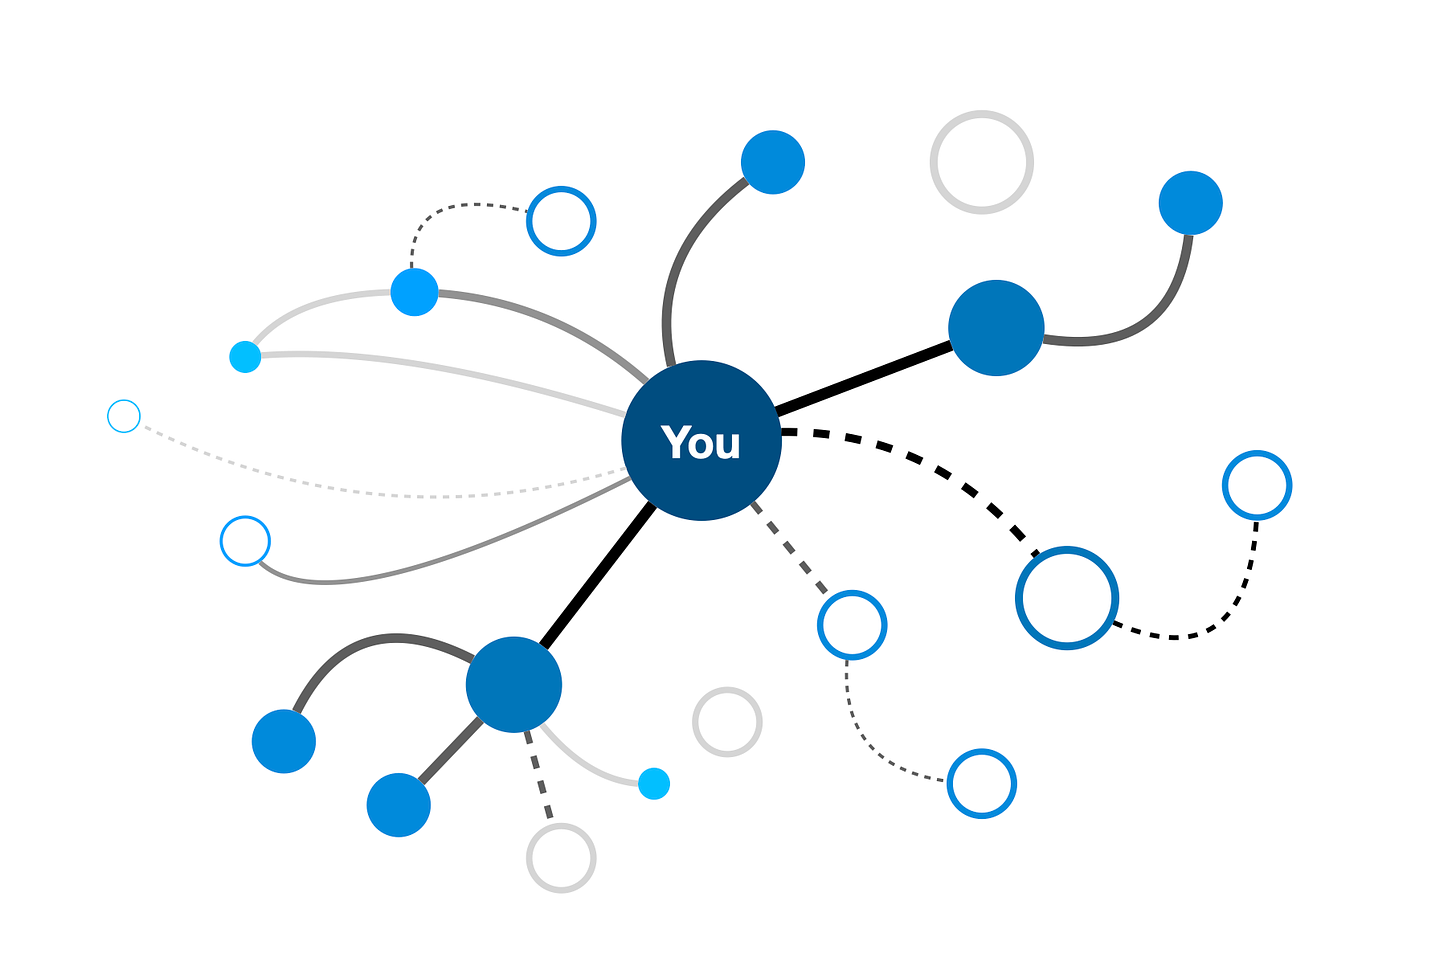 You and your network